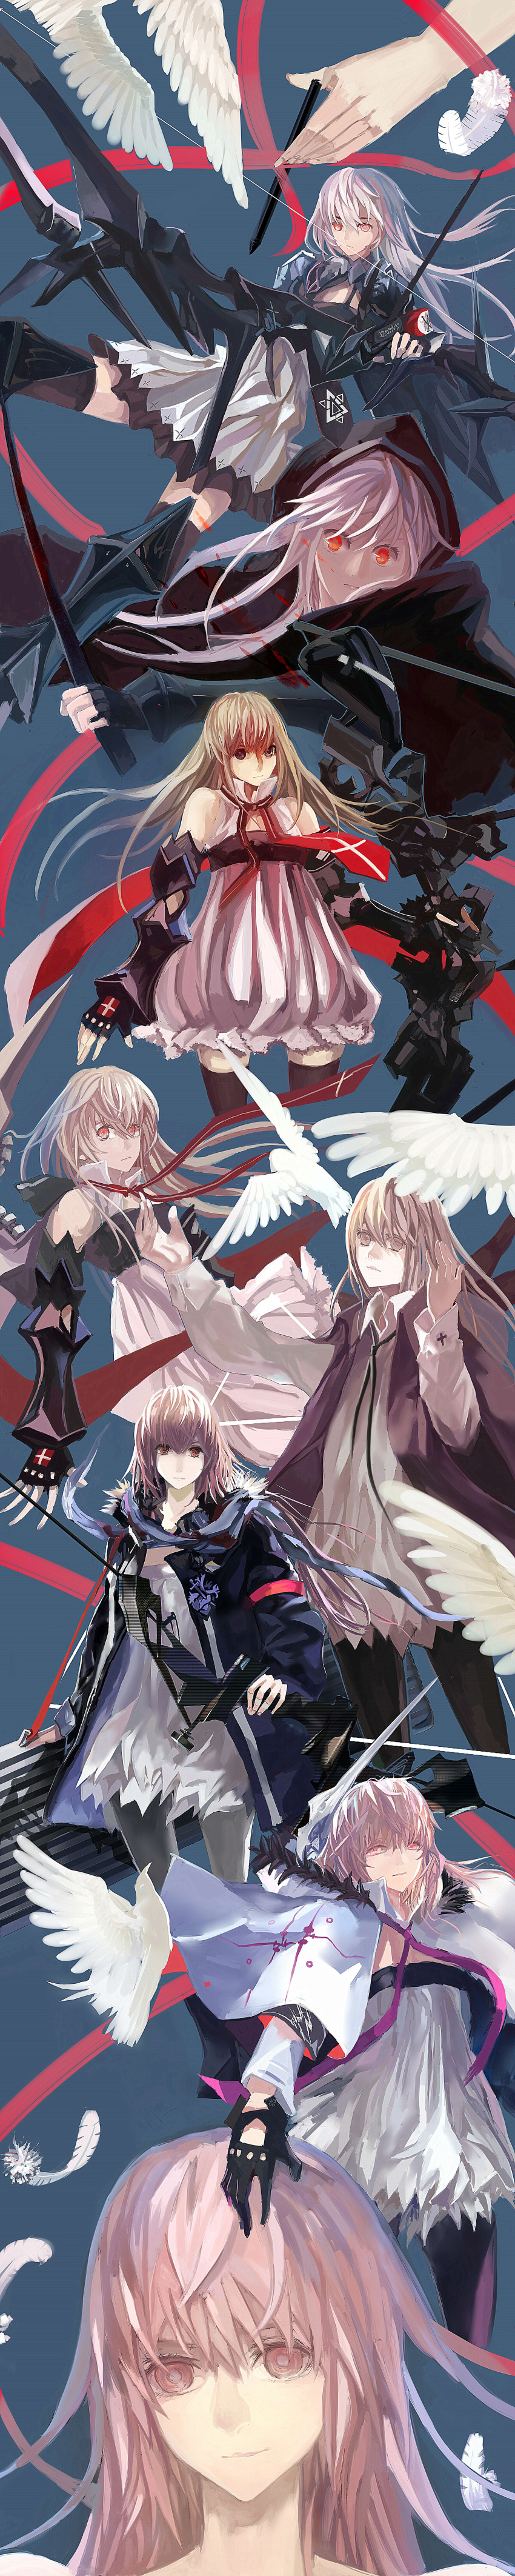 4girls absurdres angel_wings armor bangs berlinetta_(pixiv_fantasia) black_thighhighs blue_background borrowed_character bow_(weapon) commentary disembodied_limb dress feathers highres holding holding_bow_(weapon) holding_weapon incredibly_absurdres long_hair multiple_girls multiple_persona multiple_views pink_eyes pink_hair pixiv_fantasia pixiv_fantasia_5 pixiv_fantasia_fallen_kings pixiv_fantasia_new_world pixiv_fantasia_sword_regalia reiichiko simple_background sleeveless sleeveless_dress strapless strapless_dress string string_of_fate striped striped_background stylus tall_image thigh-highs weapon weapon_case white_dress wings